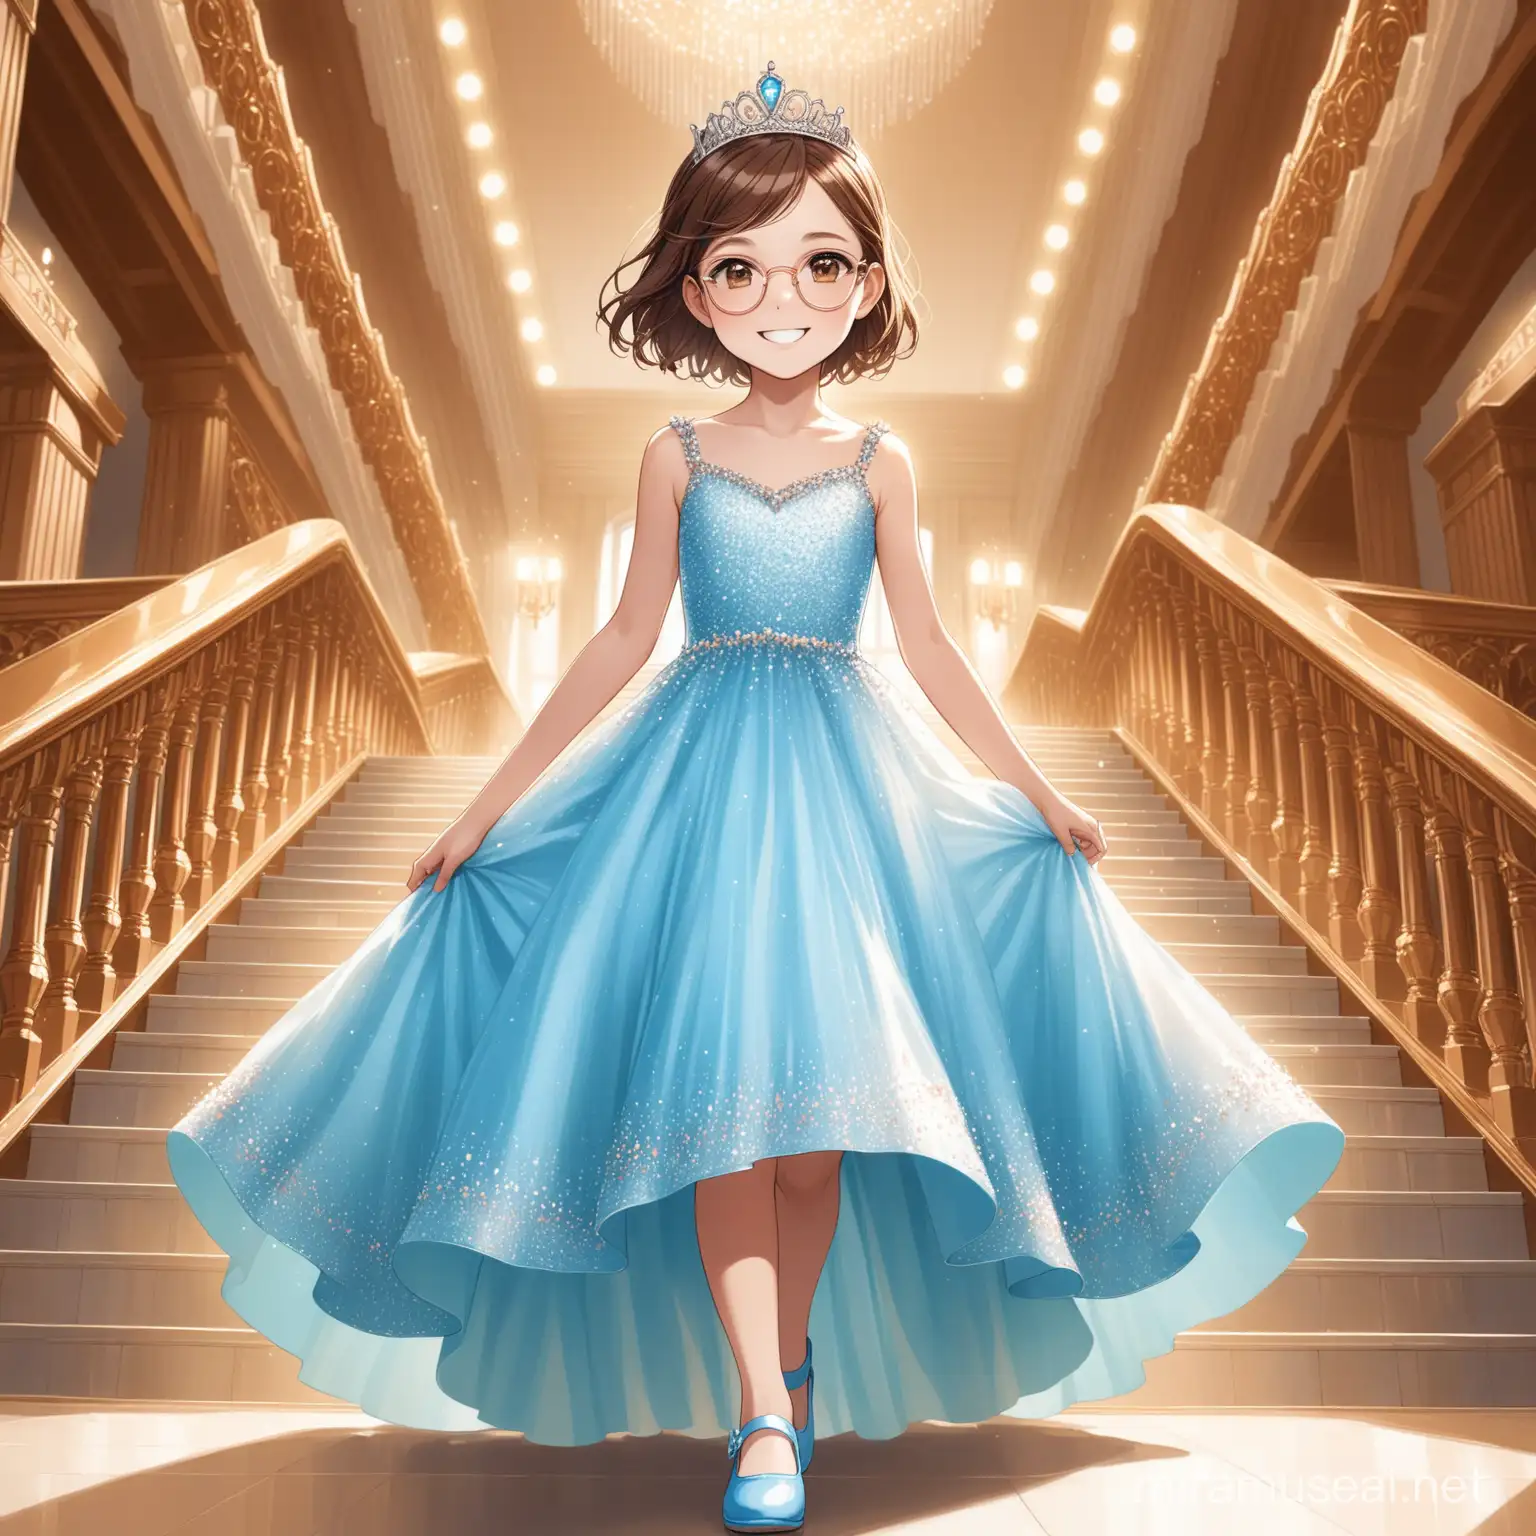 12 year old girl with short brown hair, brown eyes, rose gold glasses, smiling, wearing a silver tiara, wearing a light blue ball gown, walking down a grand staircase, blue shoes